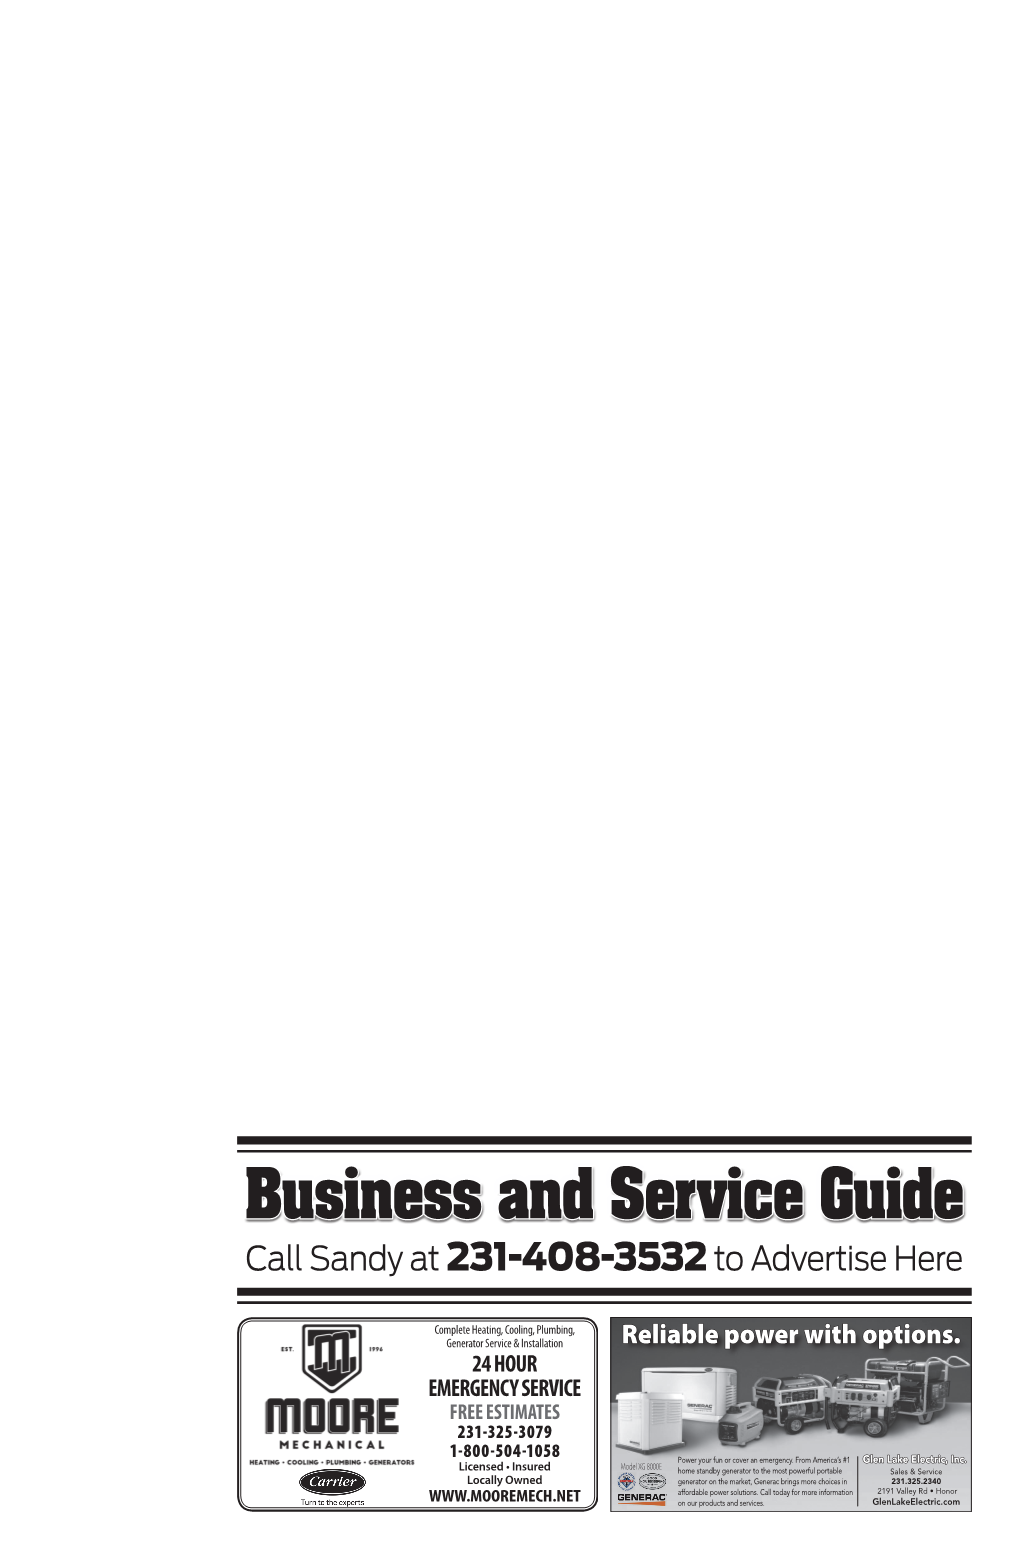 Business and Service Guide Call Sandy at 231-408-3532 to Advertise Here